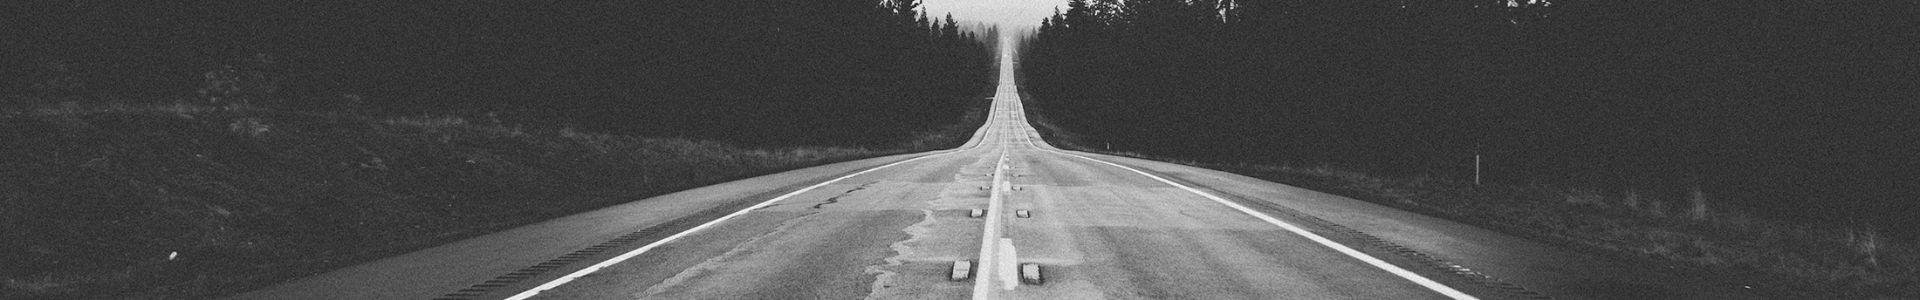 Long, lonely road